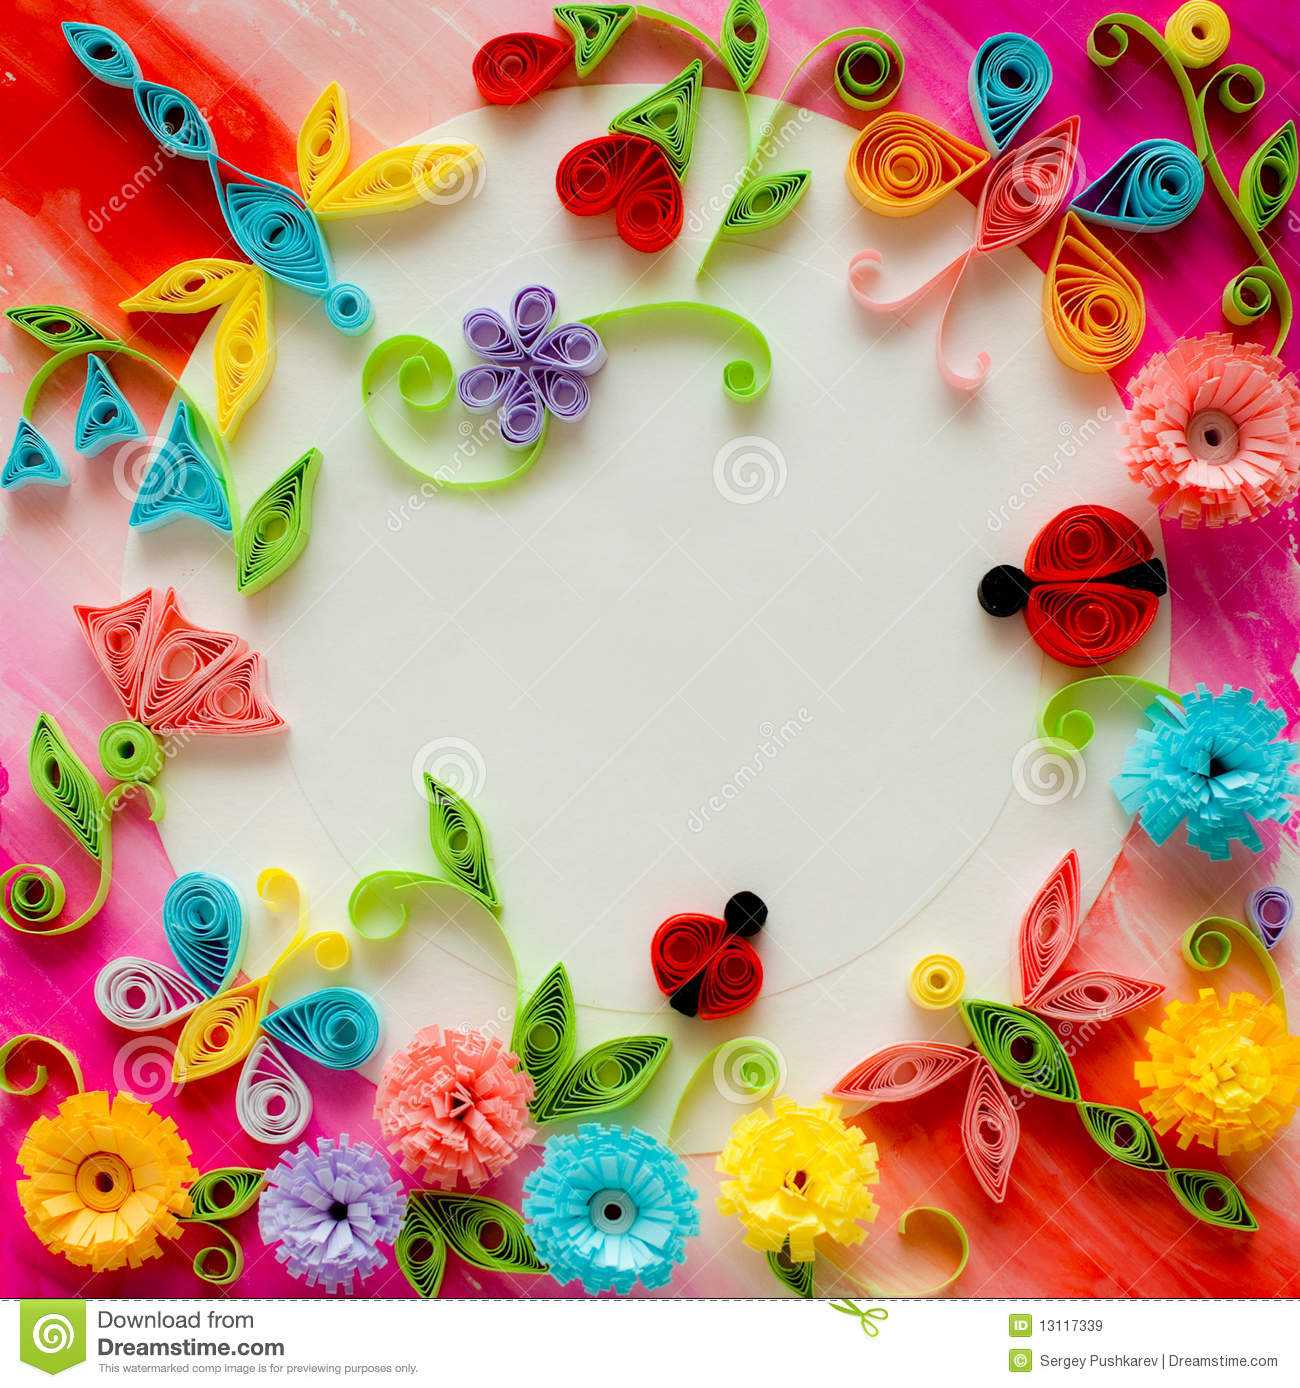 Quilling Greeting Card Blank Template Stock Image – Image Of Throughout Free Printable Blank Greeting Card Templates